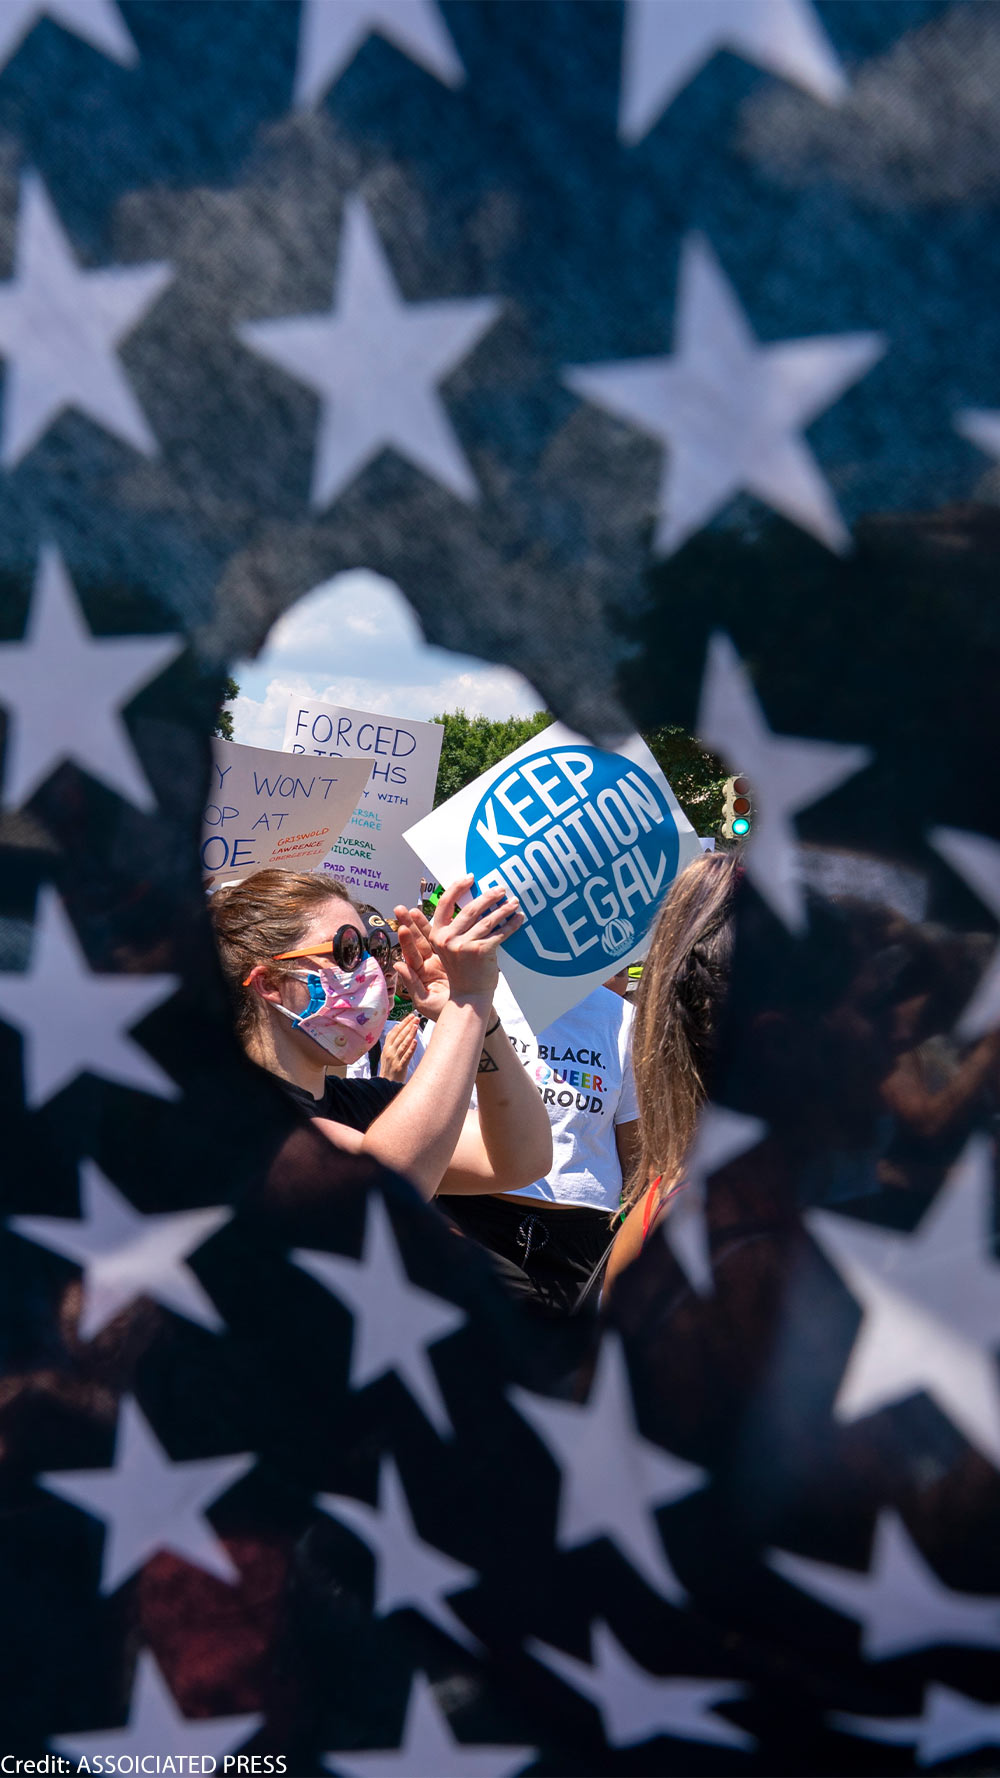 Abortion rights activists are seen through a hole in an American flag as they protest outside the Supreme Court in Washington, Saturday, June 25, 2022.